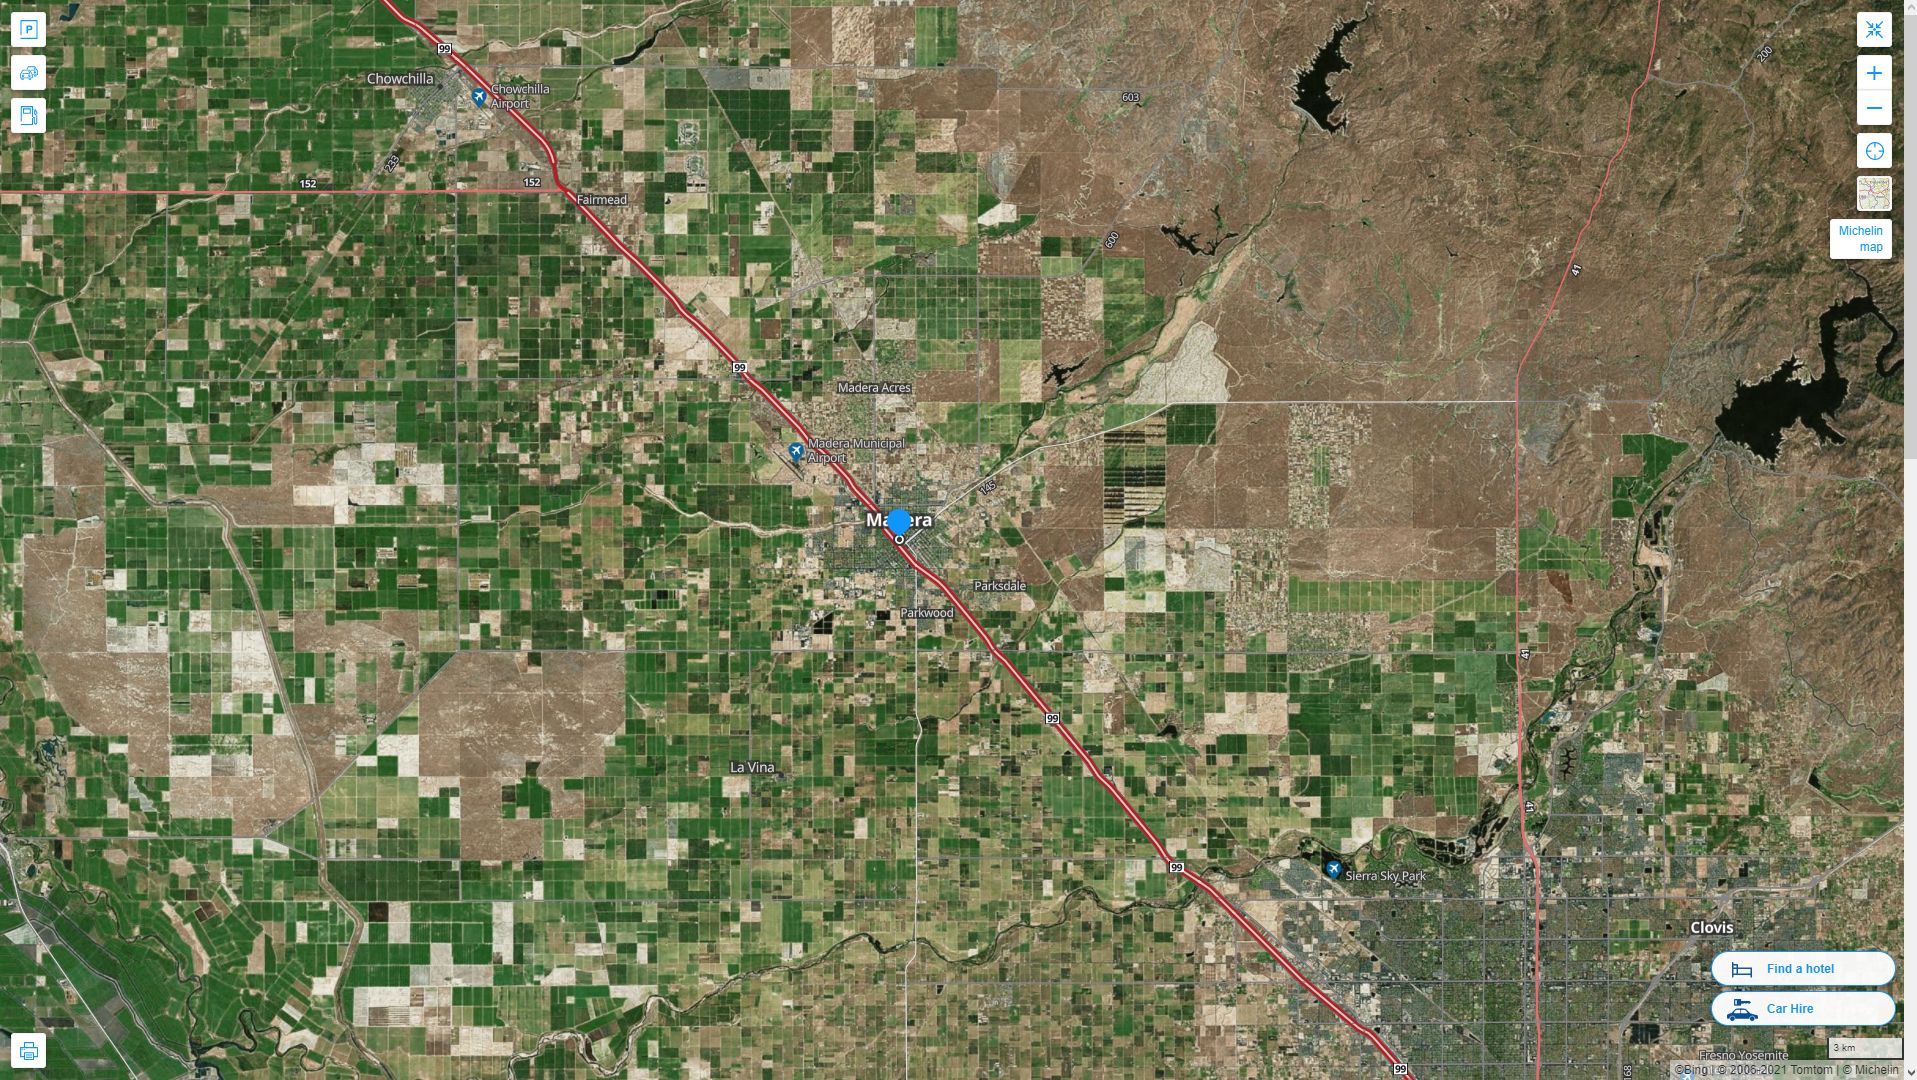 Madera California Highway and Road Map with Satellite View